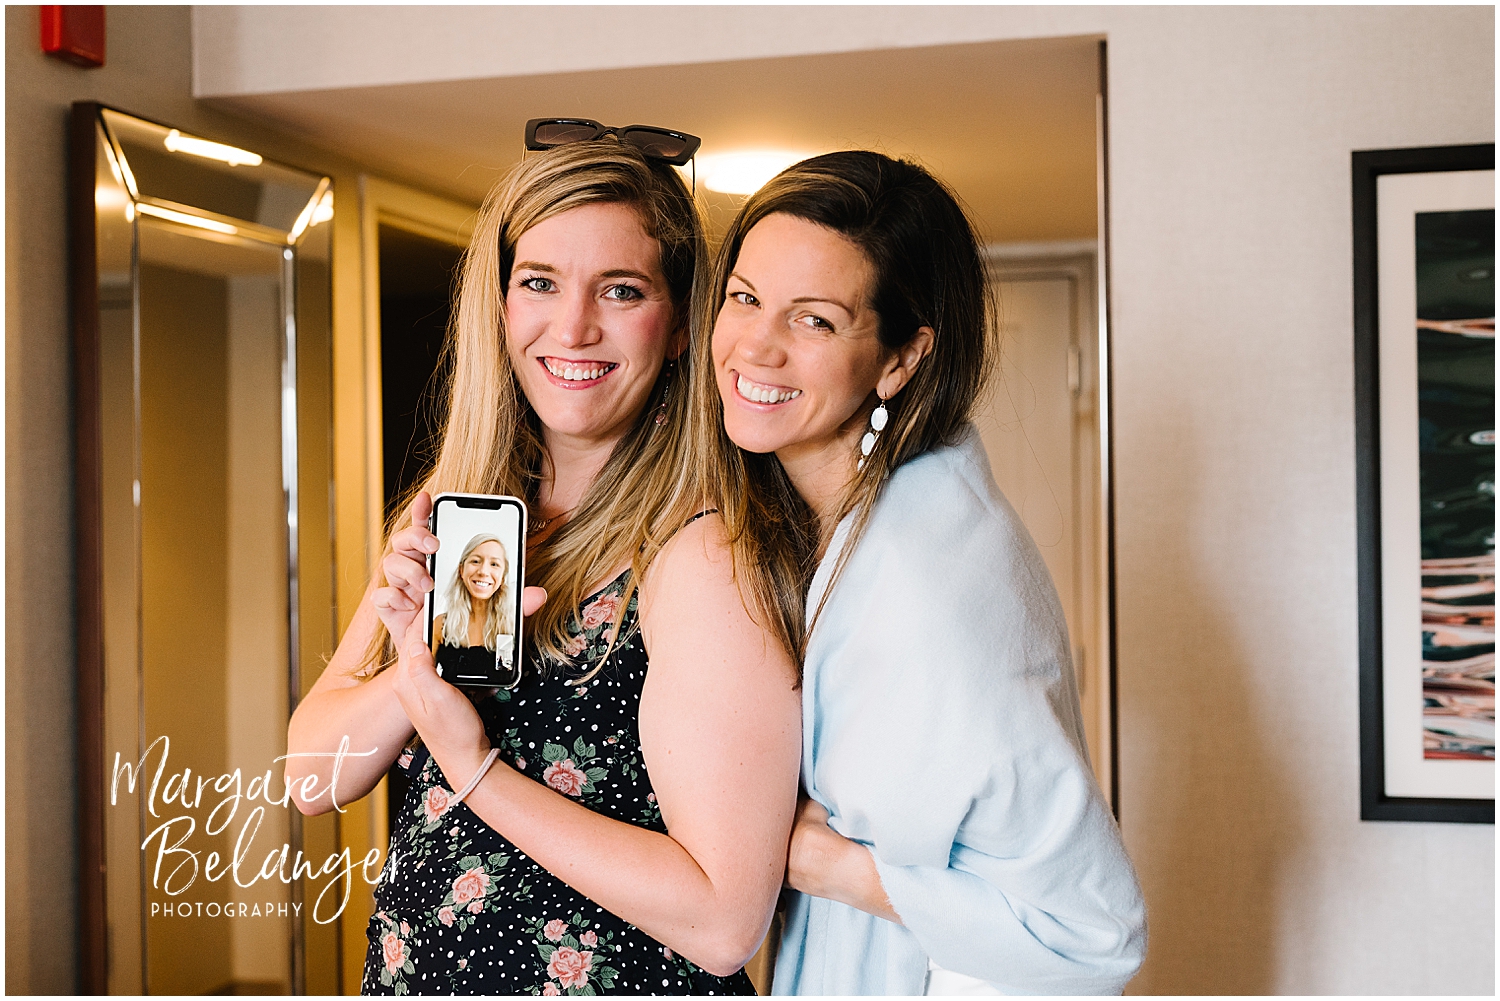 The bride and her sister posing for a photo, one holding a smartphone with their other sister on FaceTime.